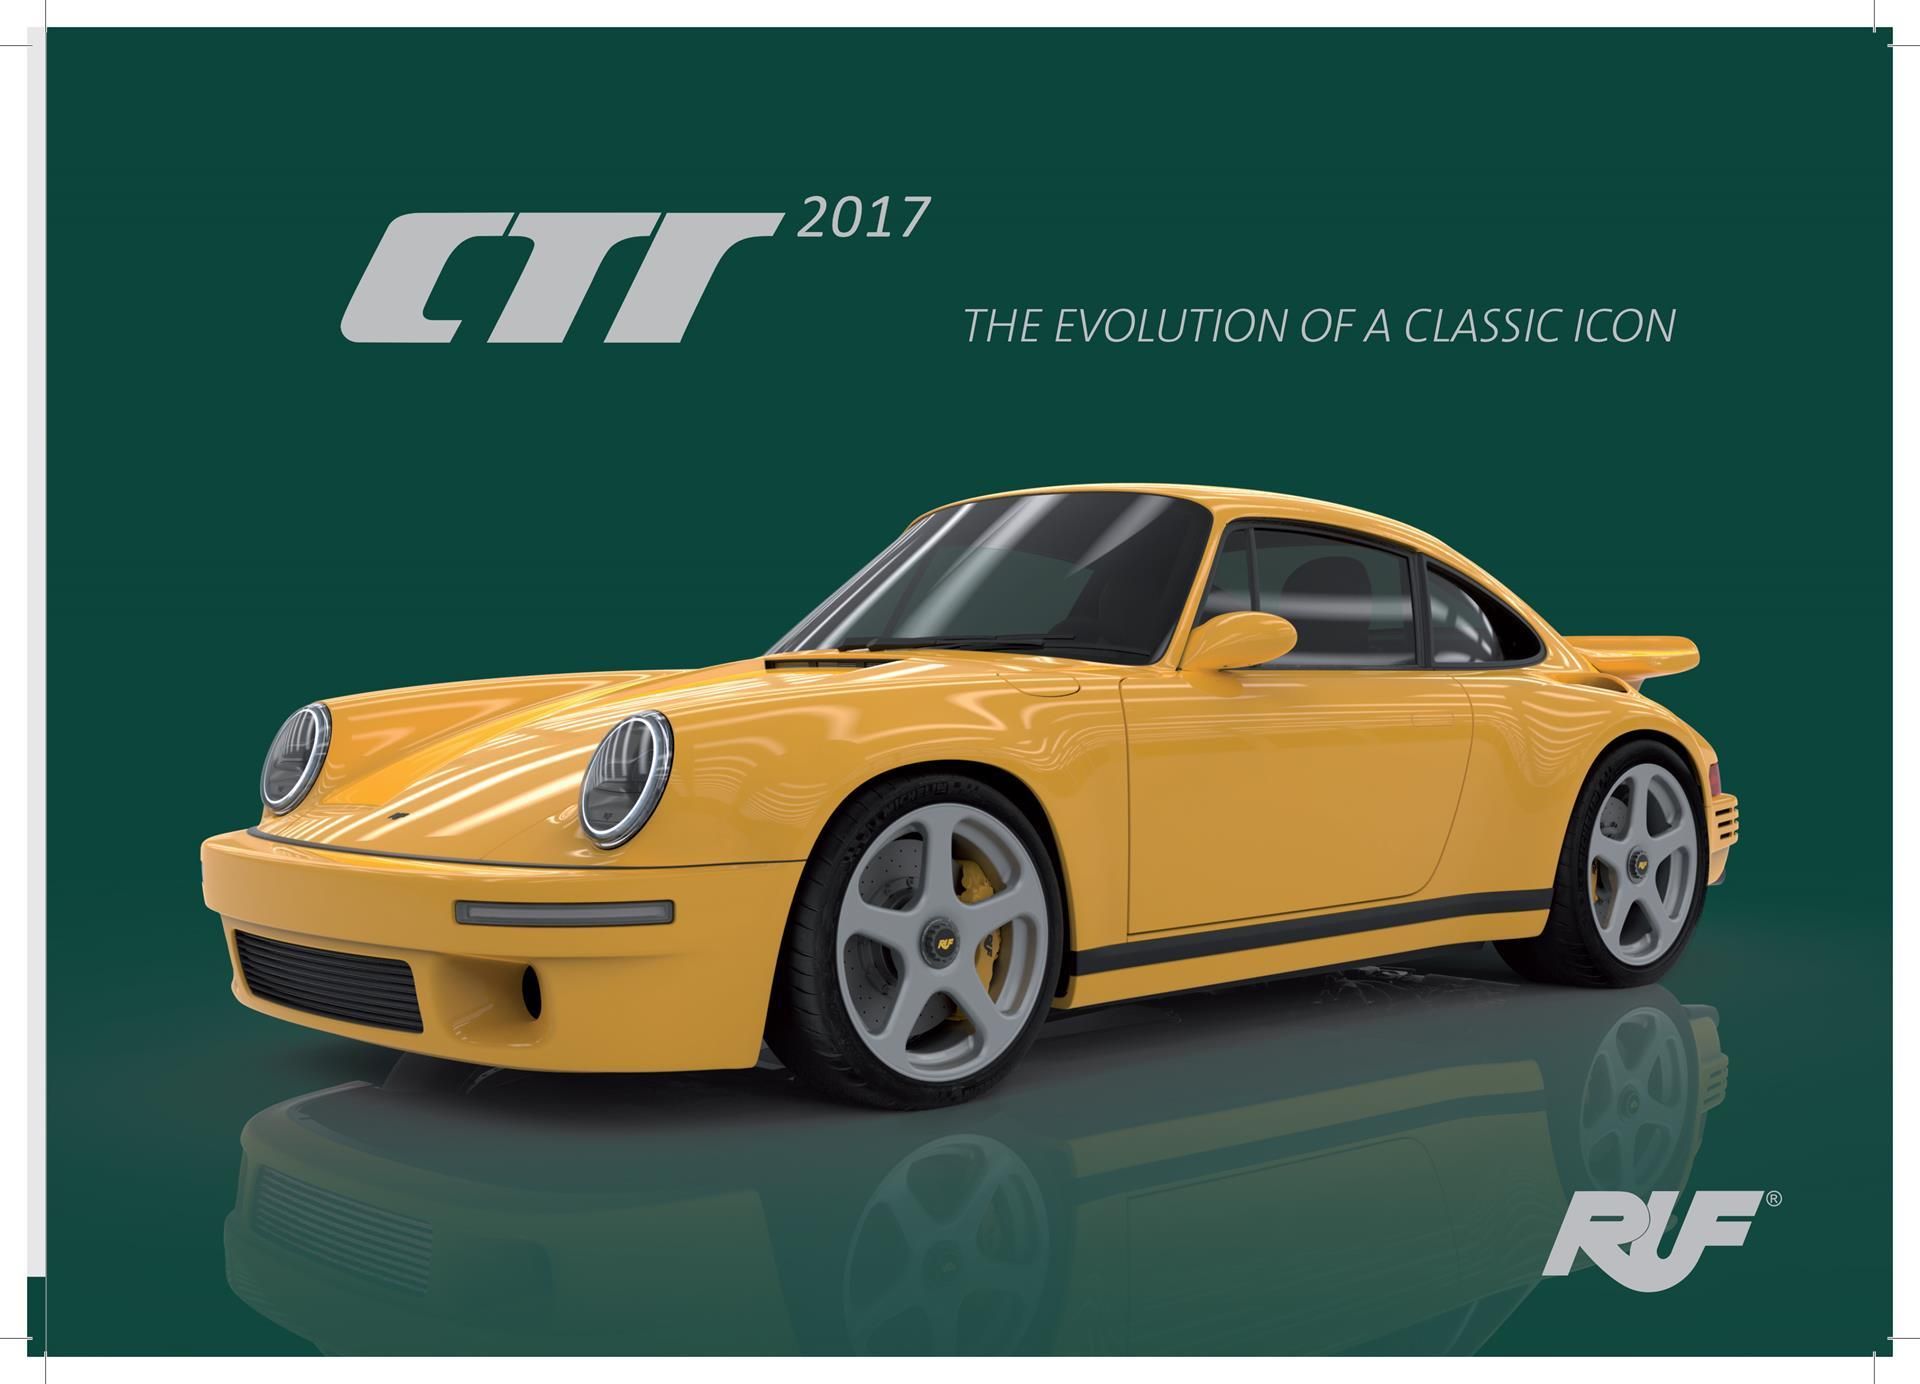 Ruf CTR Wallpaper and Image Gallery